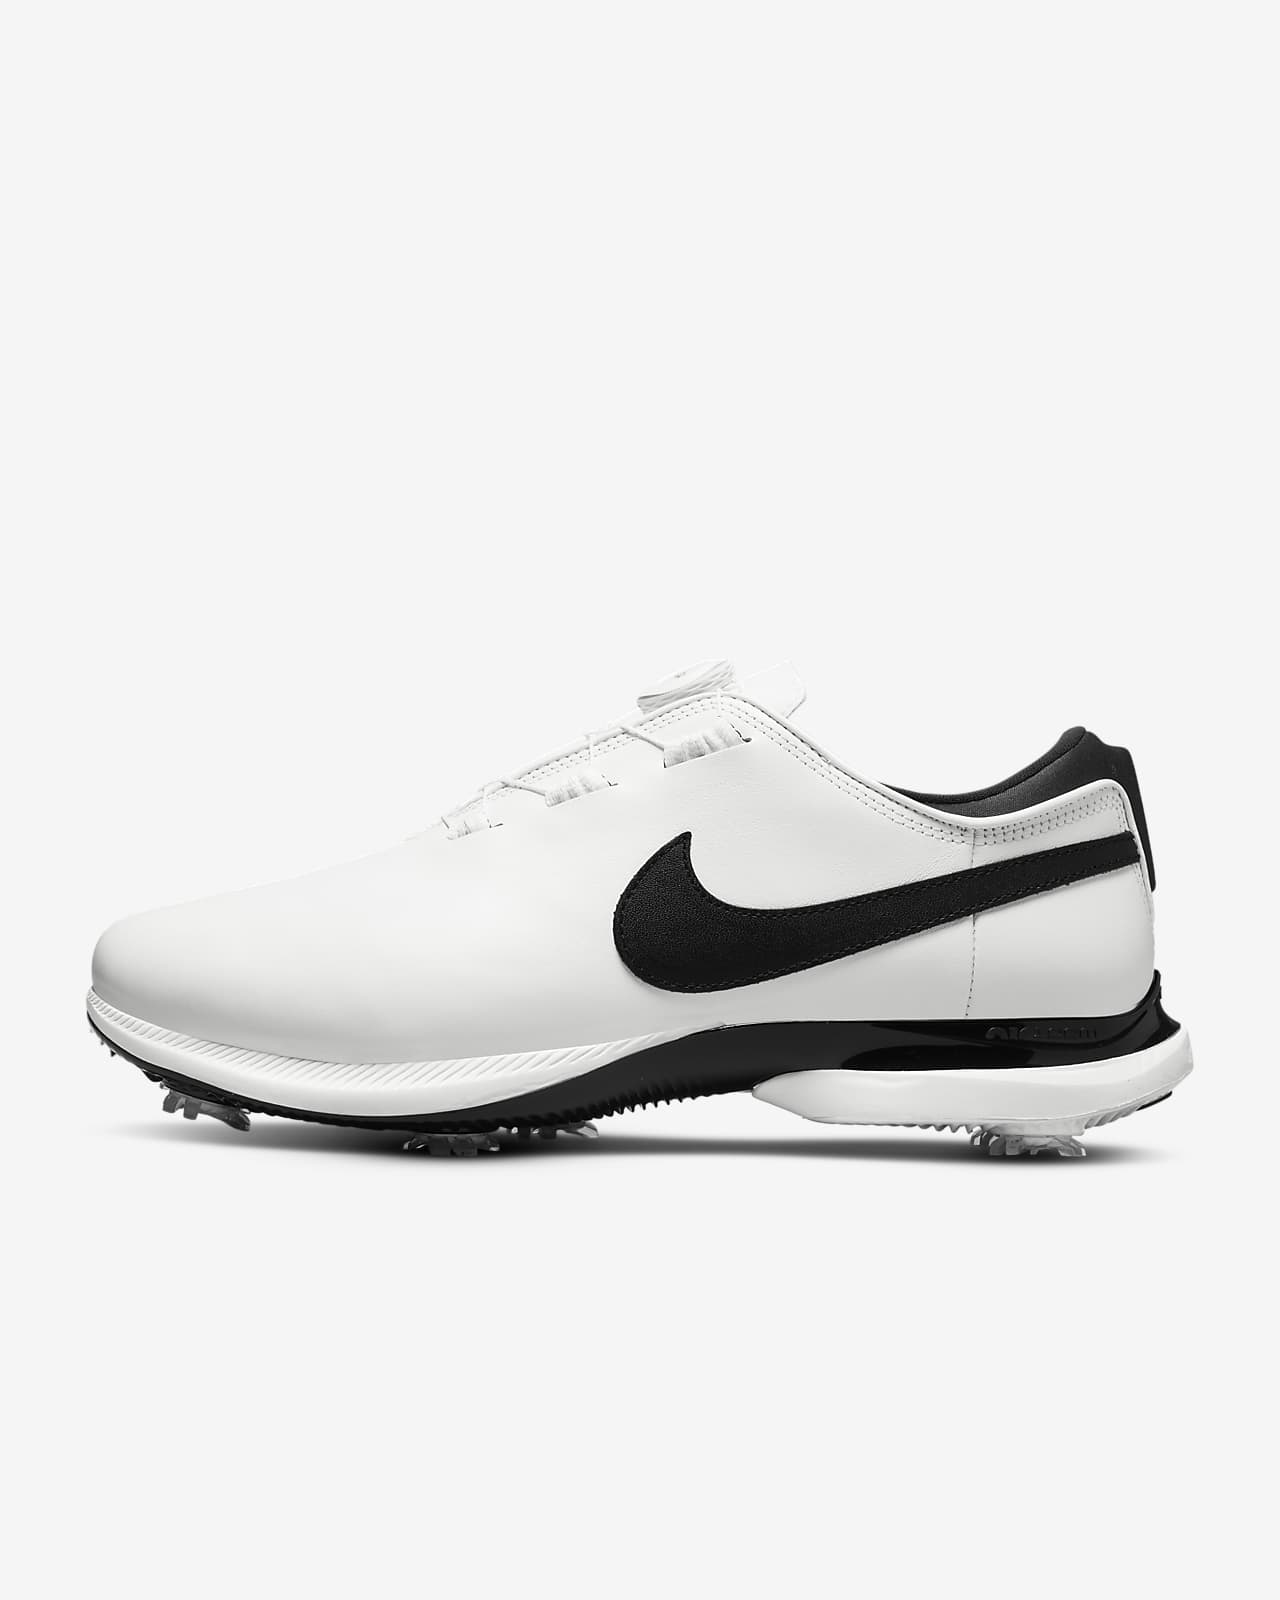 Nike Air Zoom Victory Tour 2 Boa Golf Shoes (Wide)